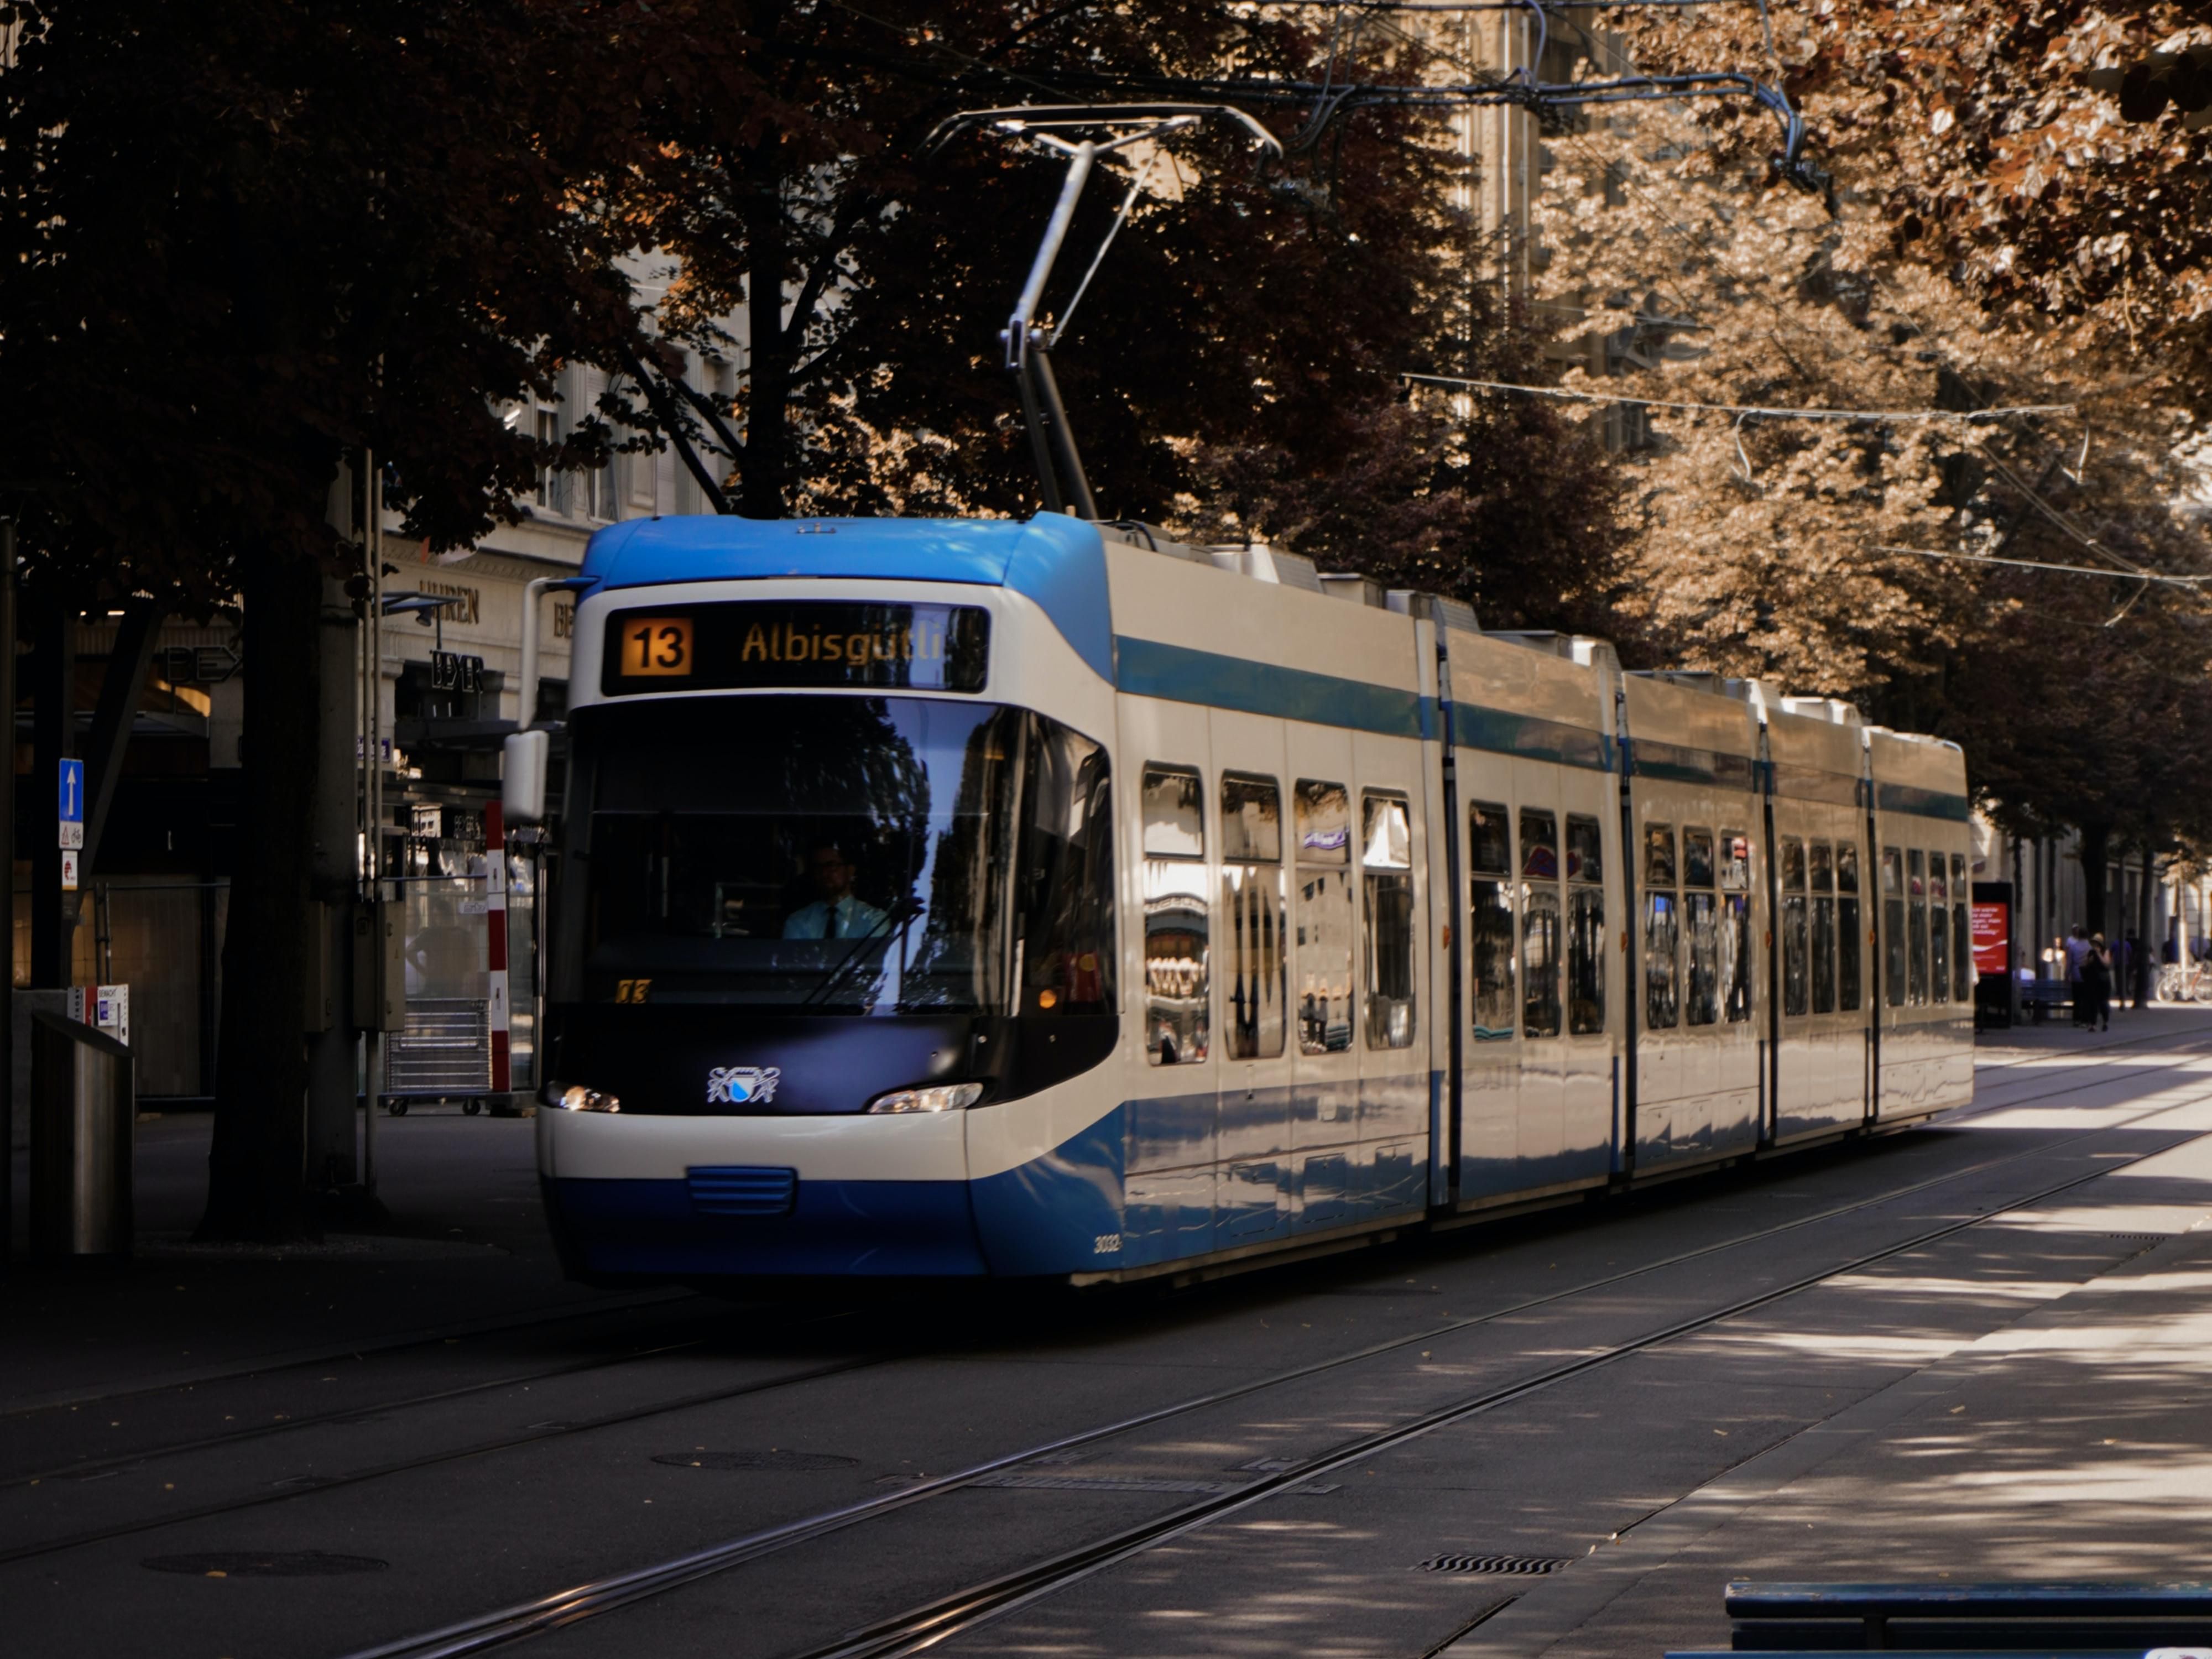 Only blocks away from the KC Street Car, travelers can tour the city freely with ease.  Stay at the Holiday Inn and visit the City's most popular sites along the KC Streetcar.